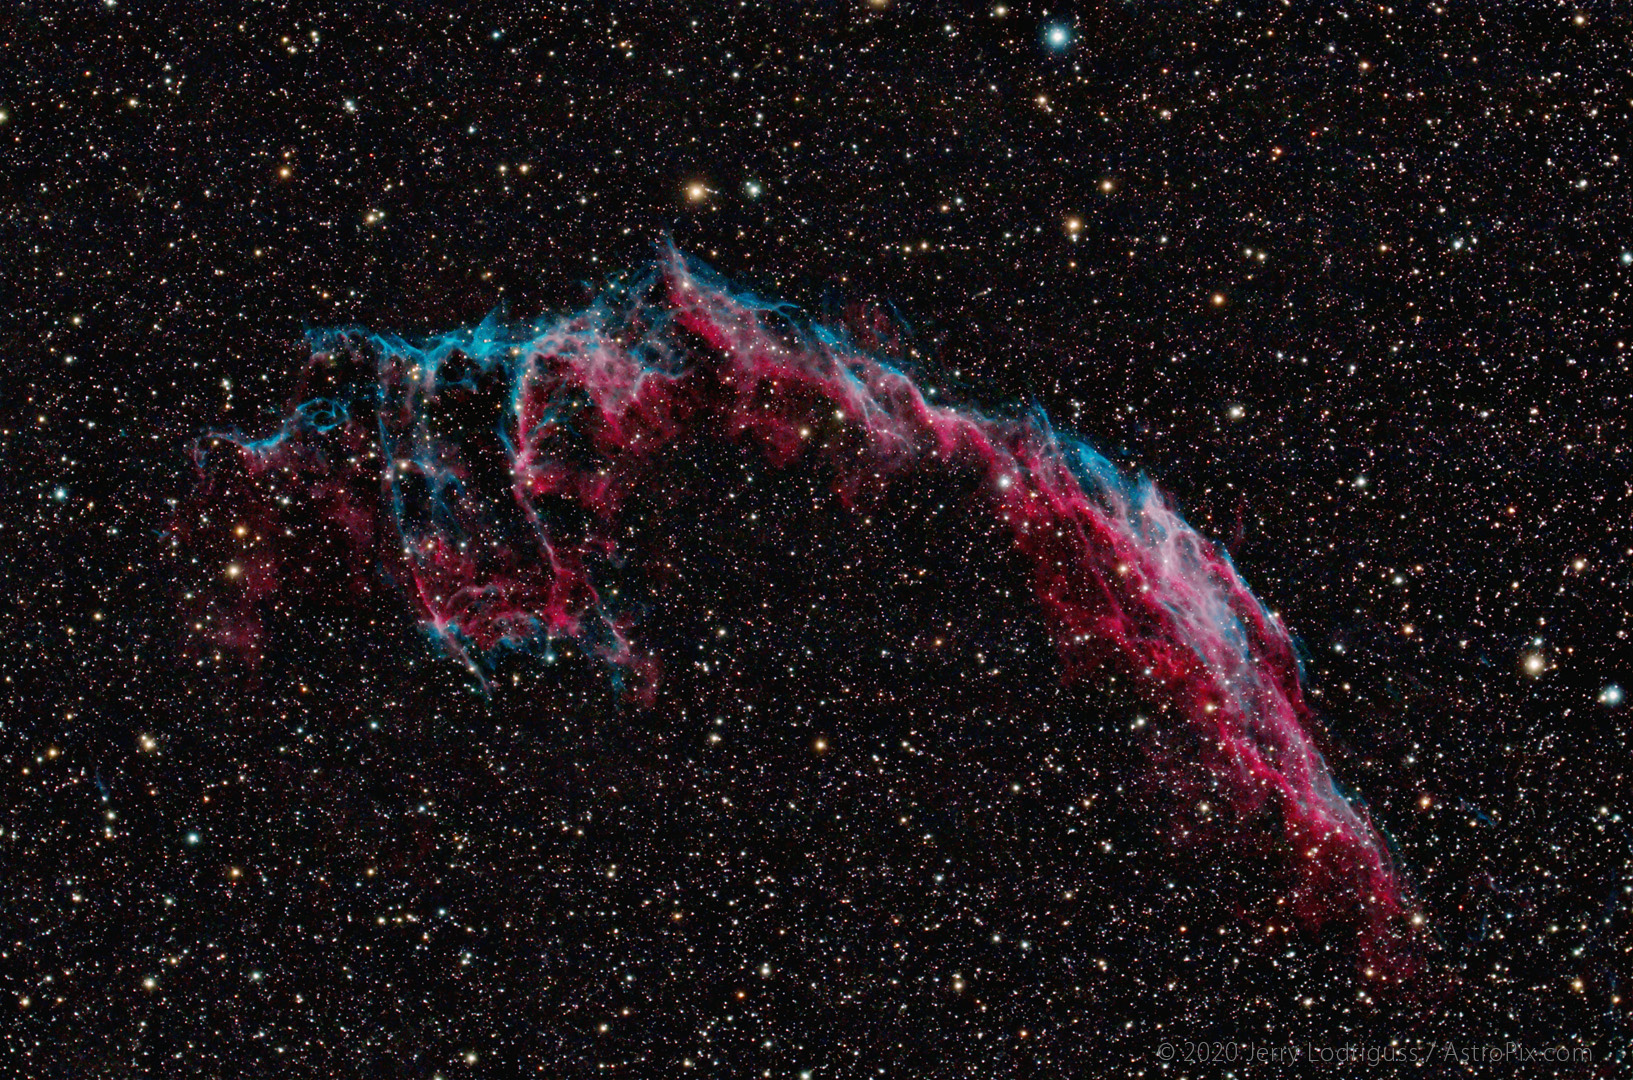 NGC 6992 / 6995 - The Veil Nebula is the remnant of a supernova explosion that occurred about 5 - 10,000 years ago. It is located 1,400 light years away in the constellation of Cygnus. NGC 6992/95 is the brighter eastern half of the nebula.